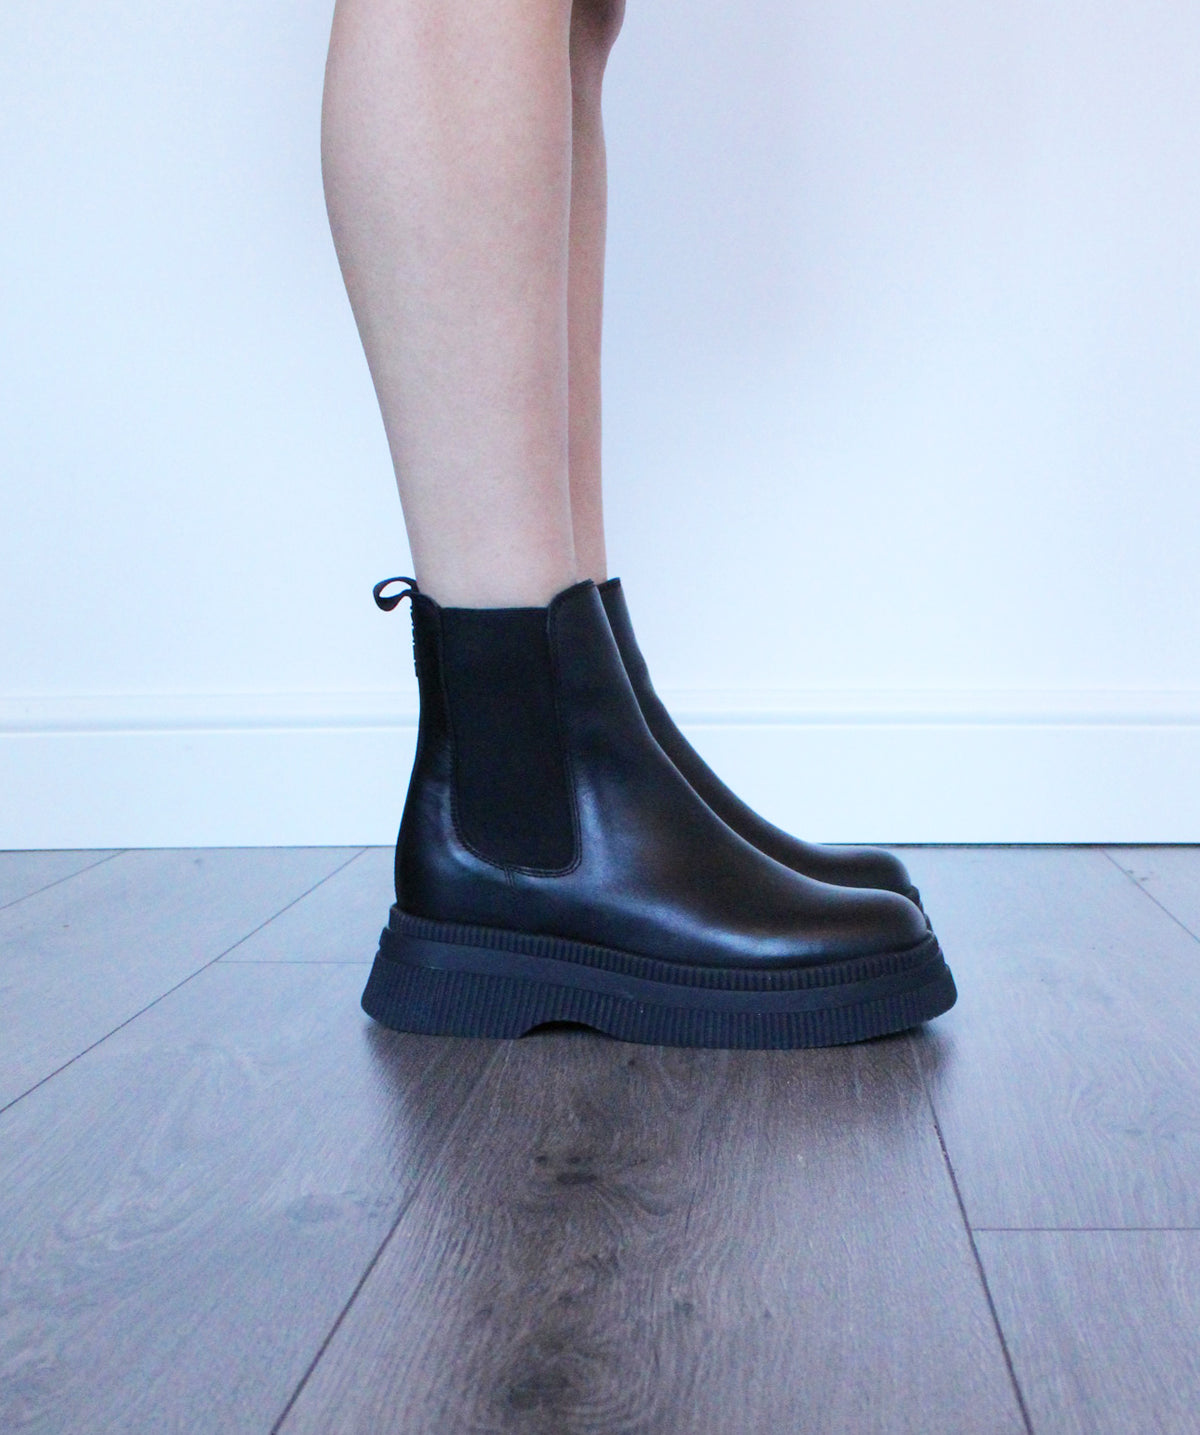 GANNI S1736 Leather Chelsea Boots in Black